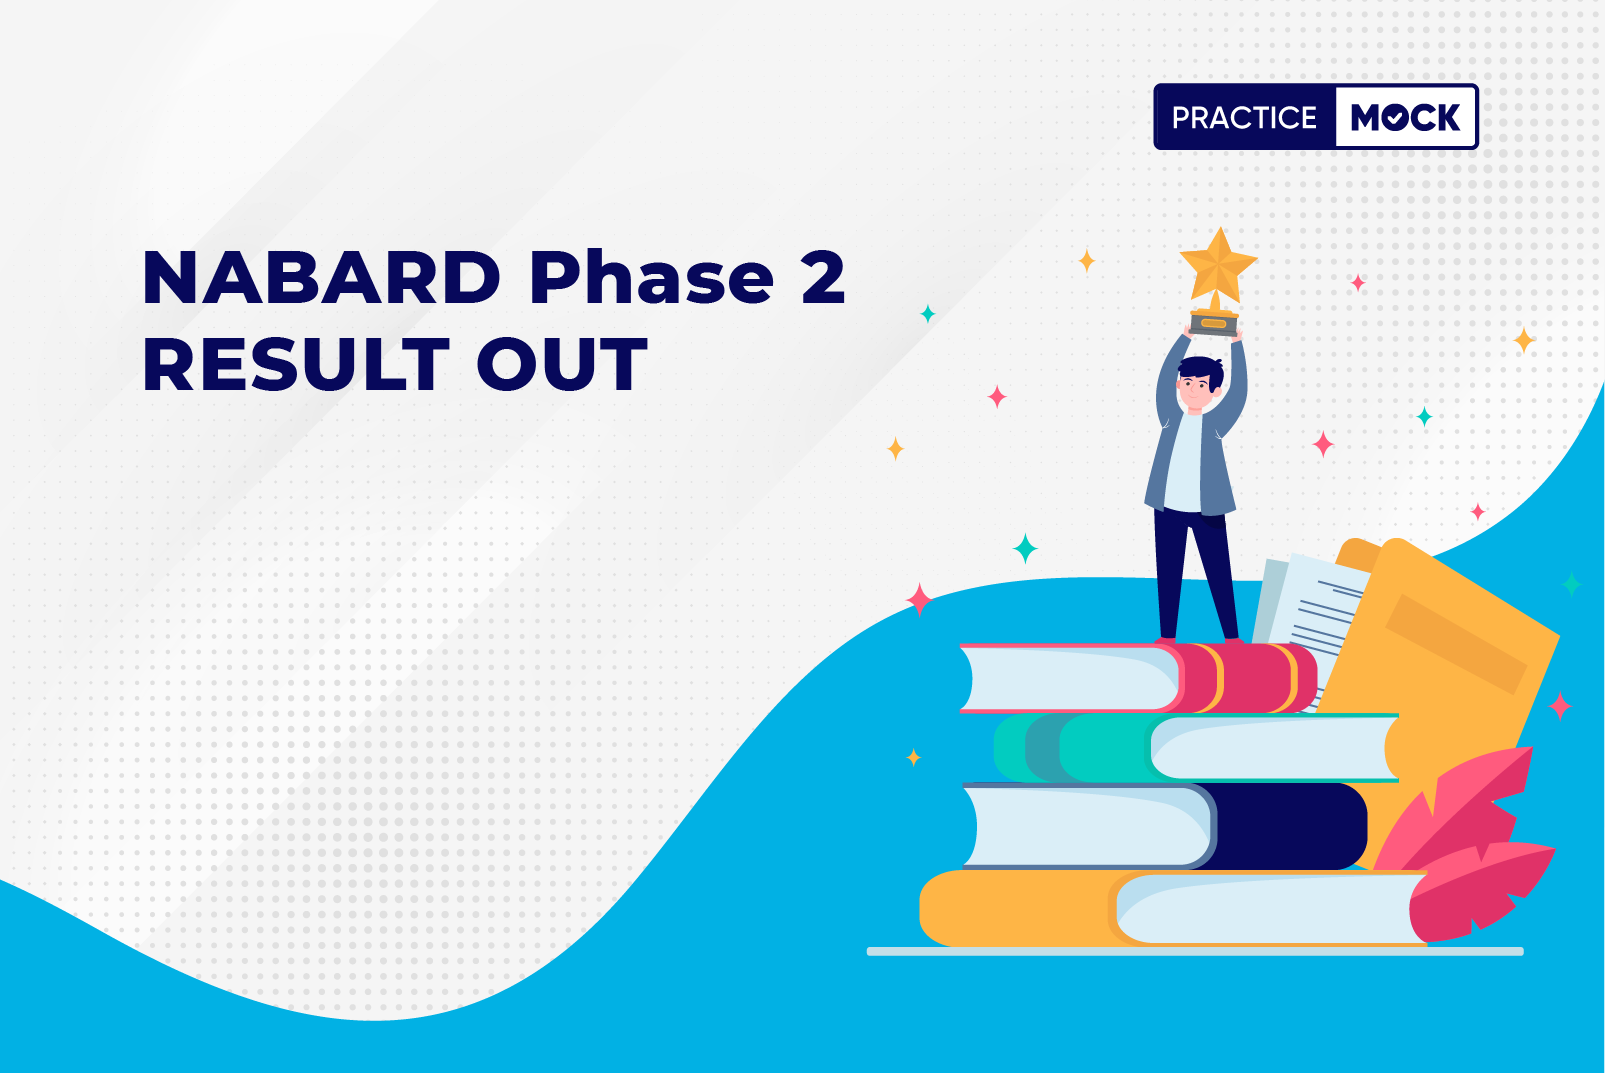 NABARD Phase 2 Result out!!